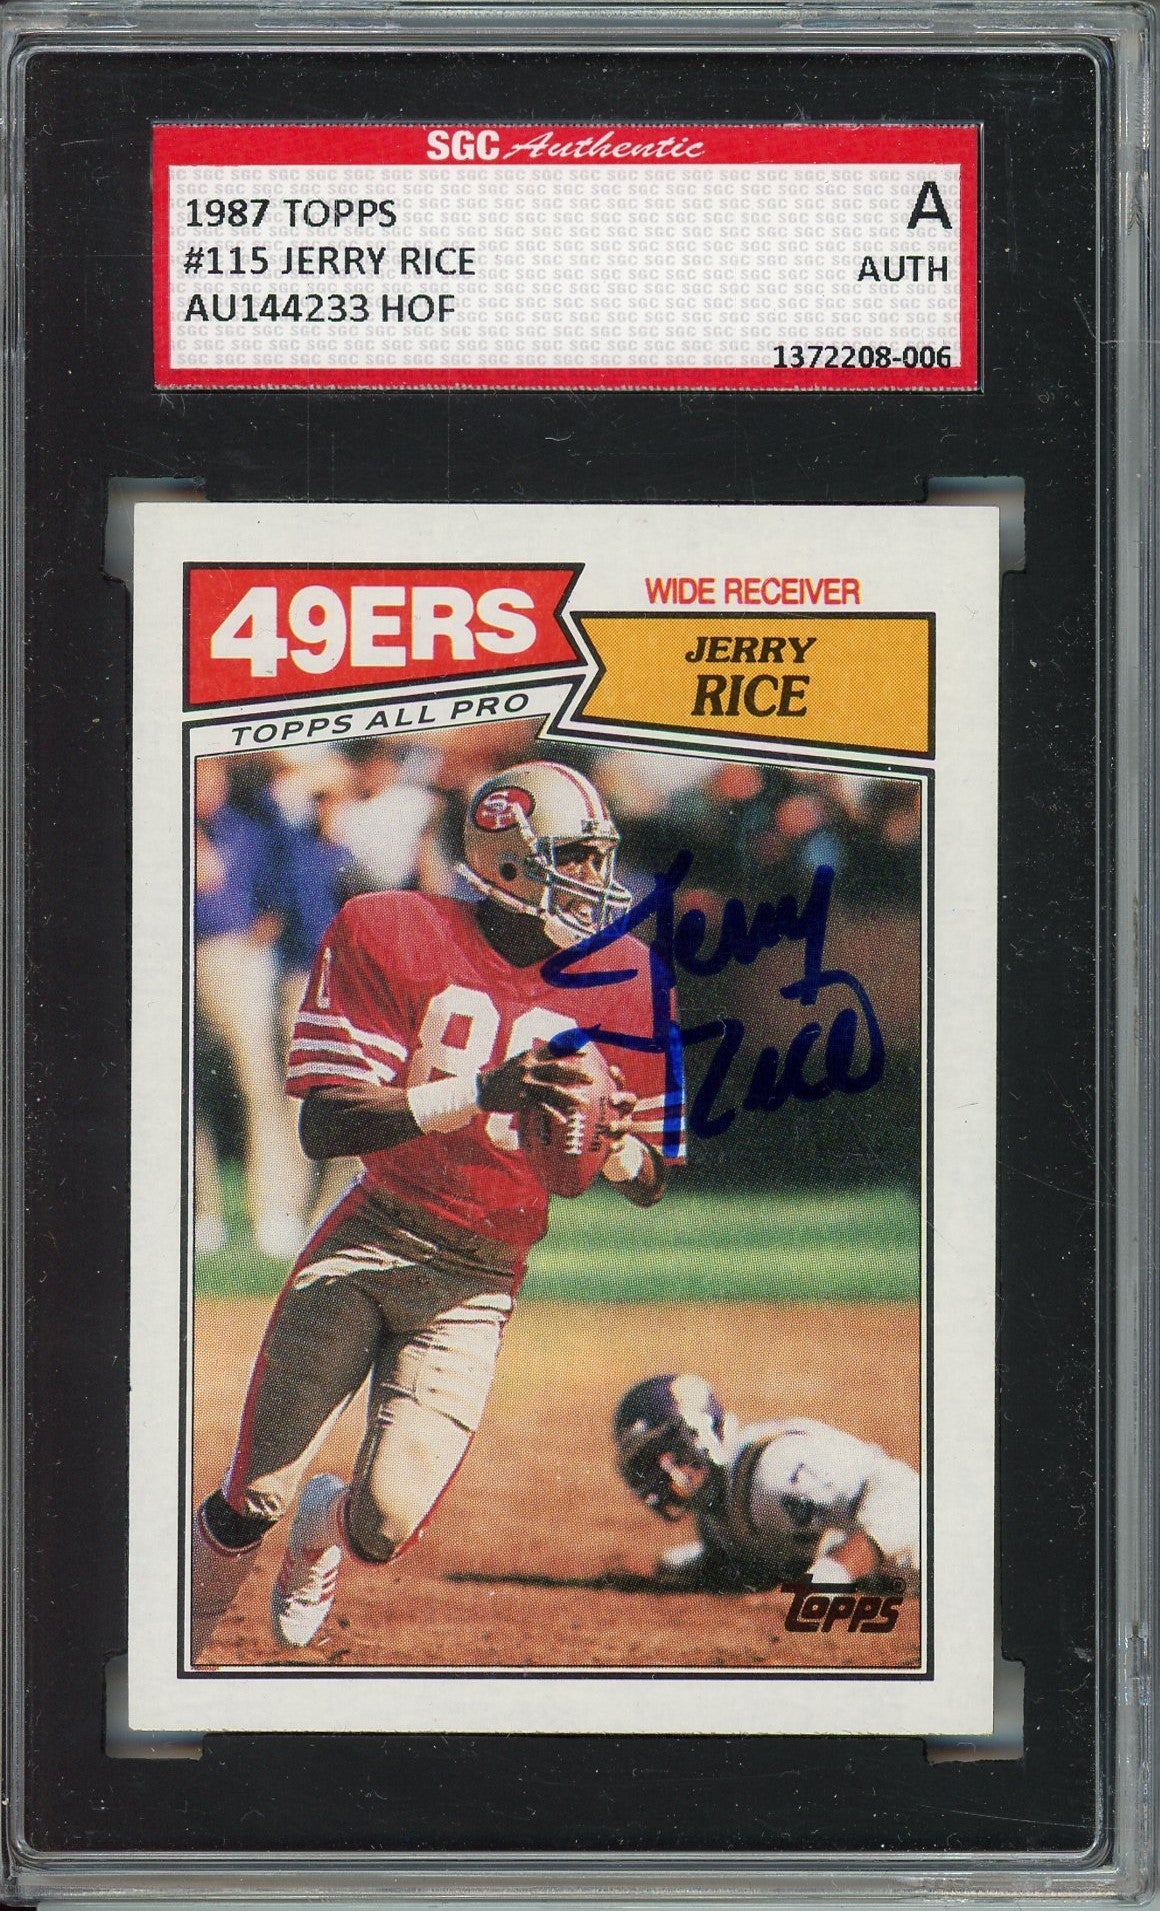 1987 TOPPS JERRY RICE AUTOGRAPHED CARD SGC AUTHENTIC